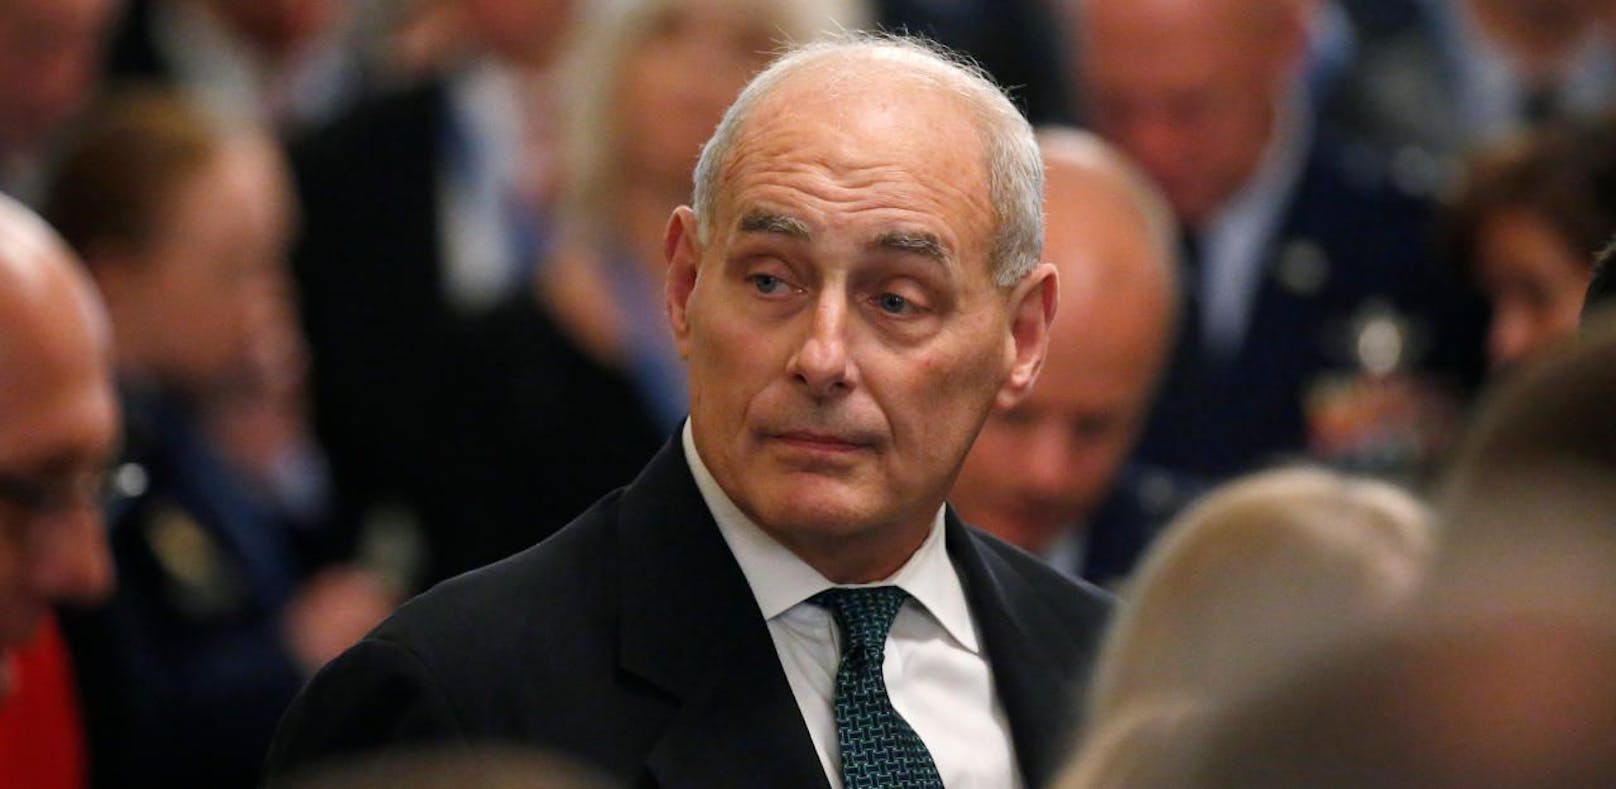 White House Chief of Staff John Kelly 